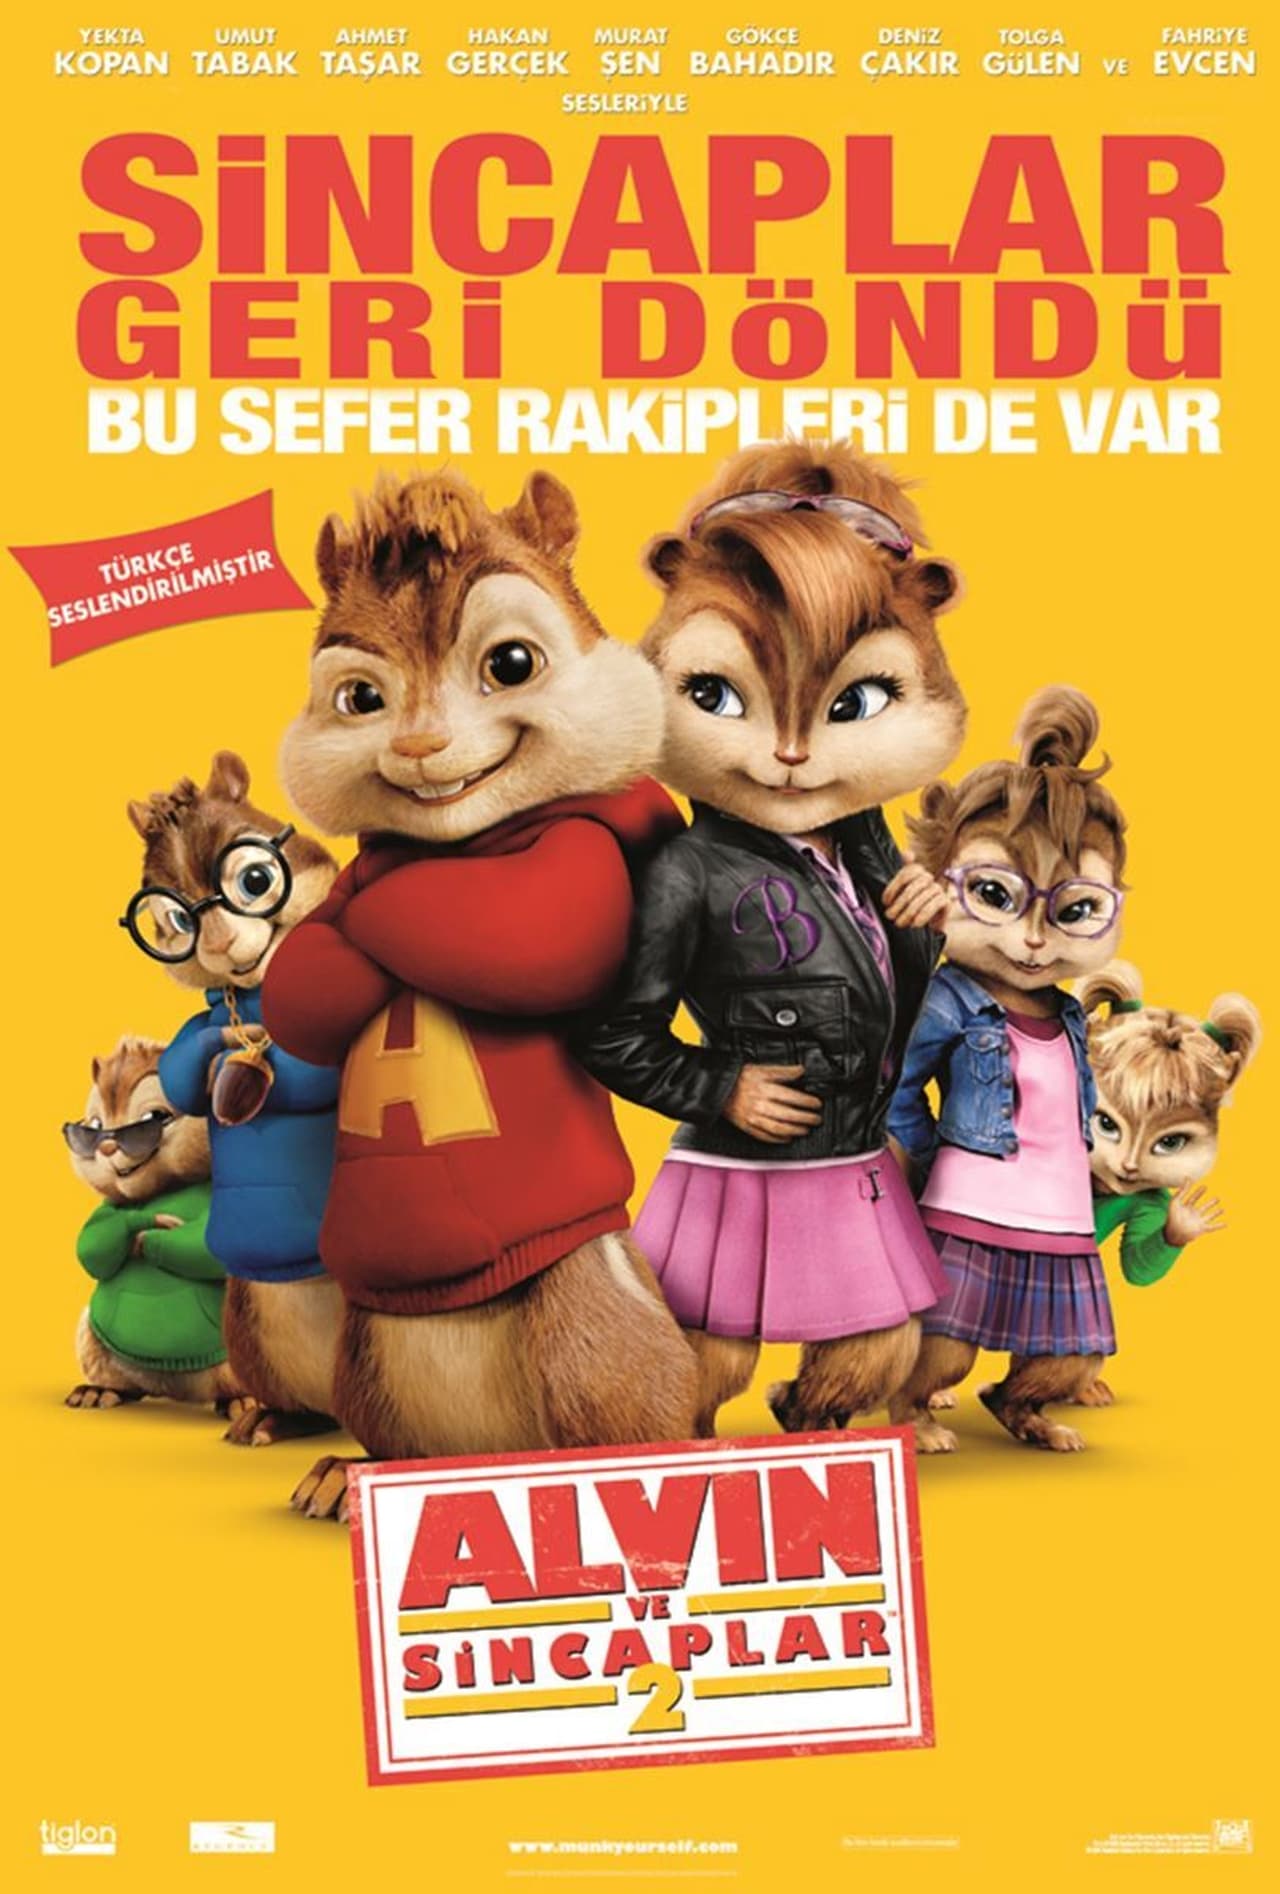 Alvin and the Chipmunks: The Squeakquel (2009) 640Kbps 23.976Fps 48Khz 5.1Ch DD+ NF E-AC3 Turkish Audio TAC